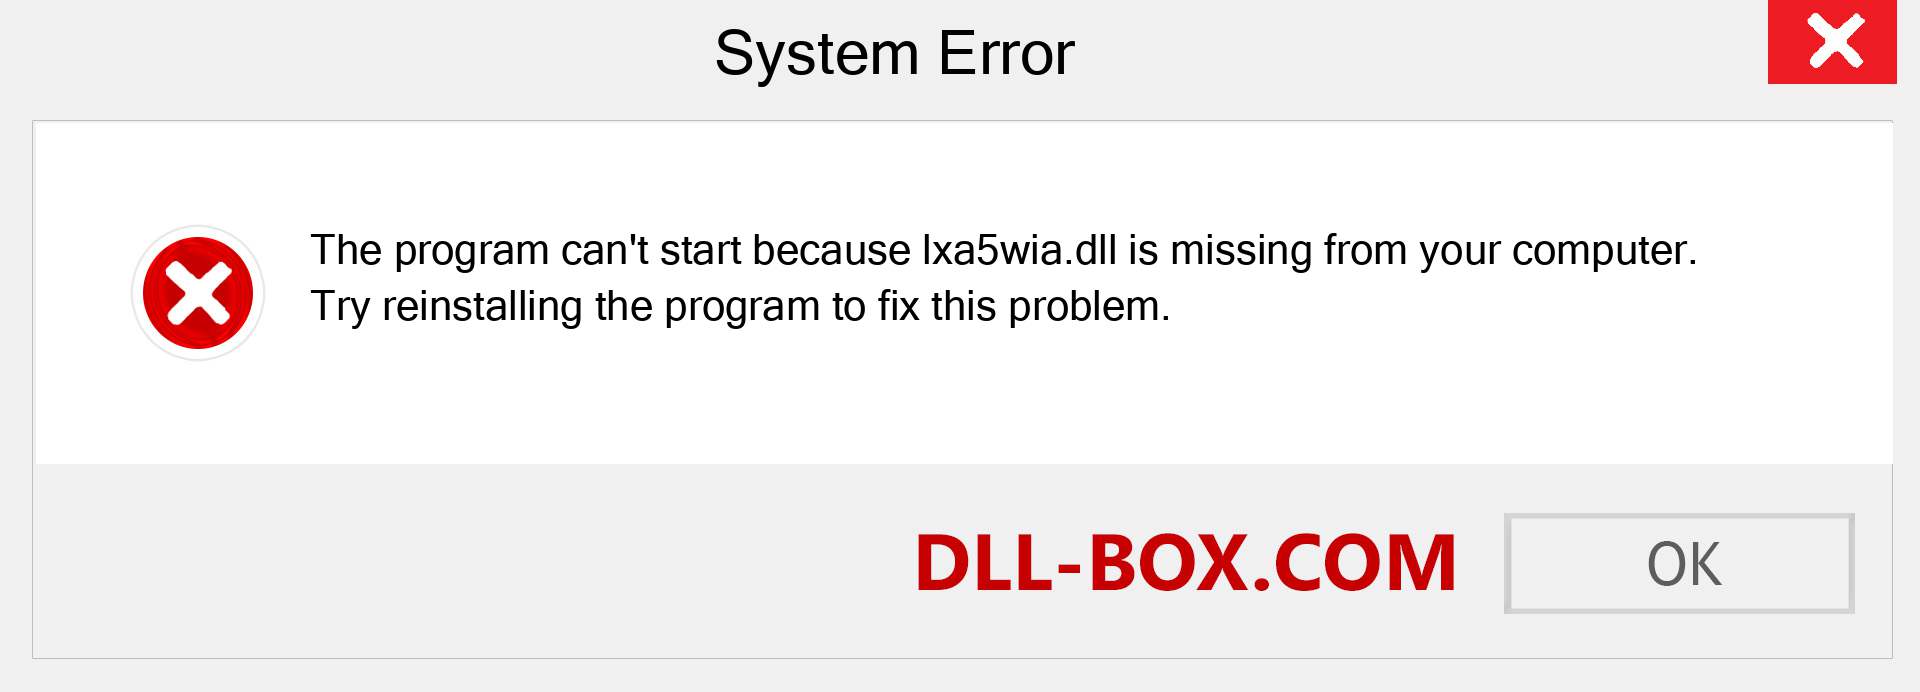  lxa5wia.dll file is missing?. Download for Windows 7, 8, 10 - Fix  lxa5wia dll Missing Error on Windows, photos, images